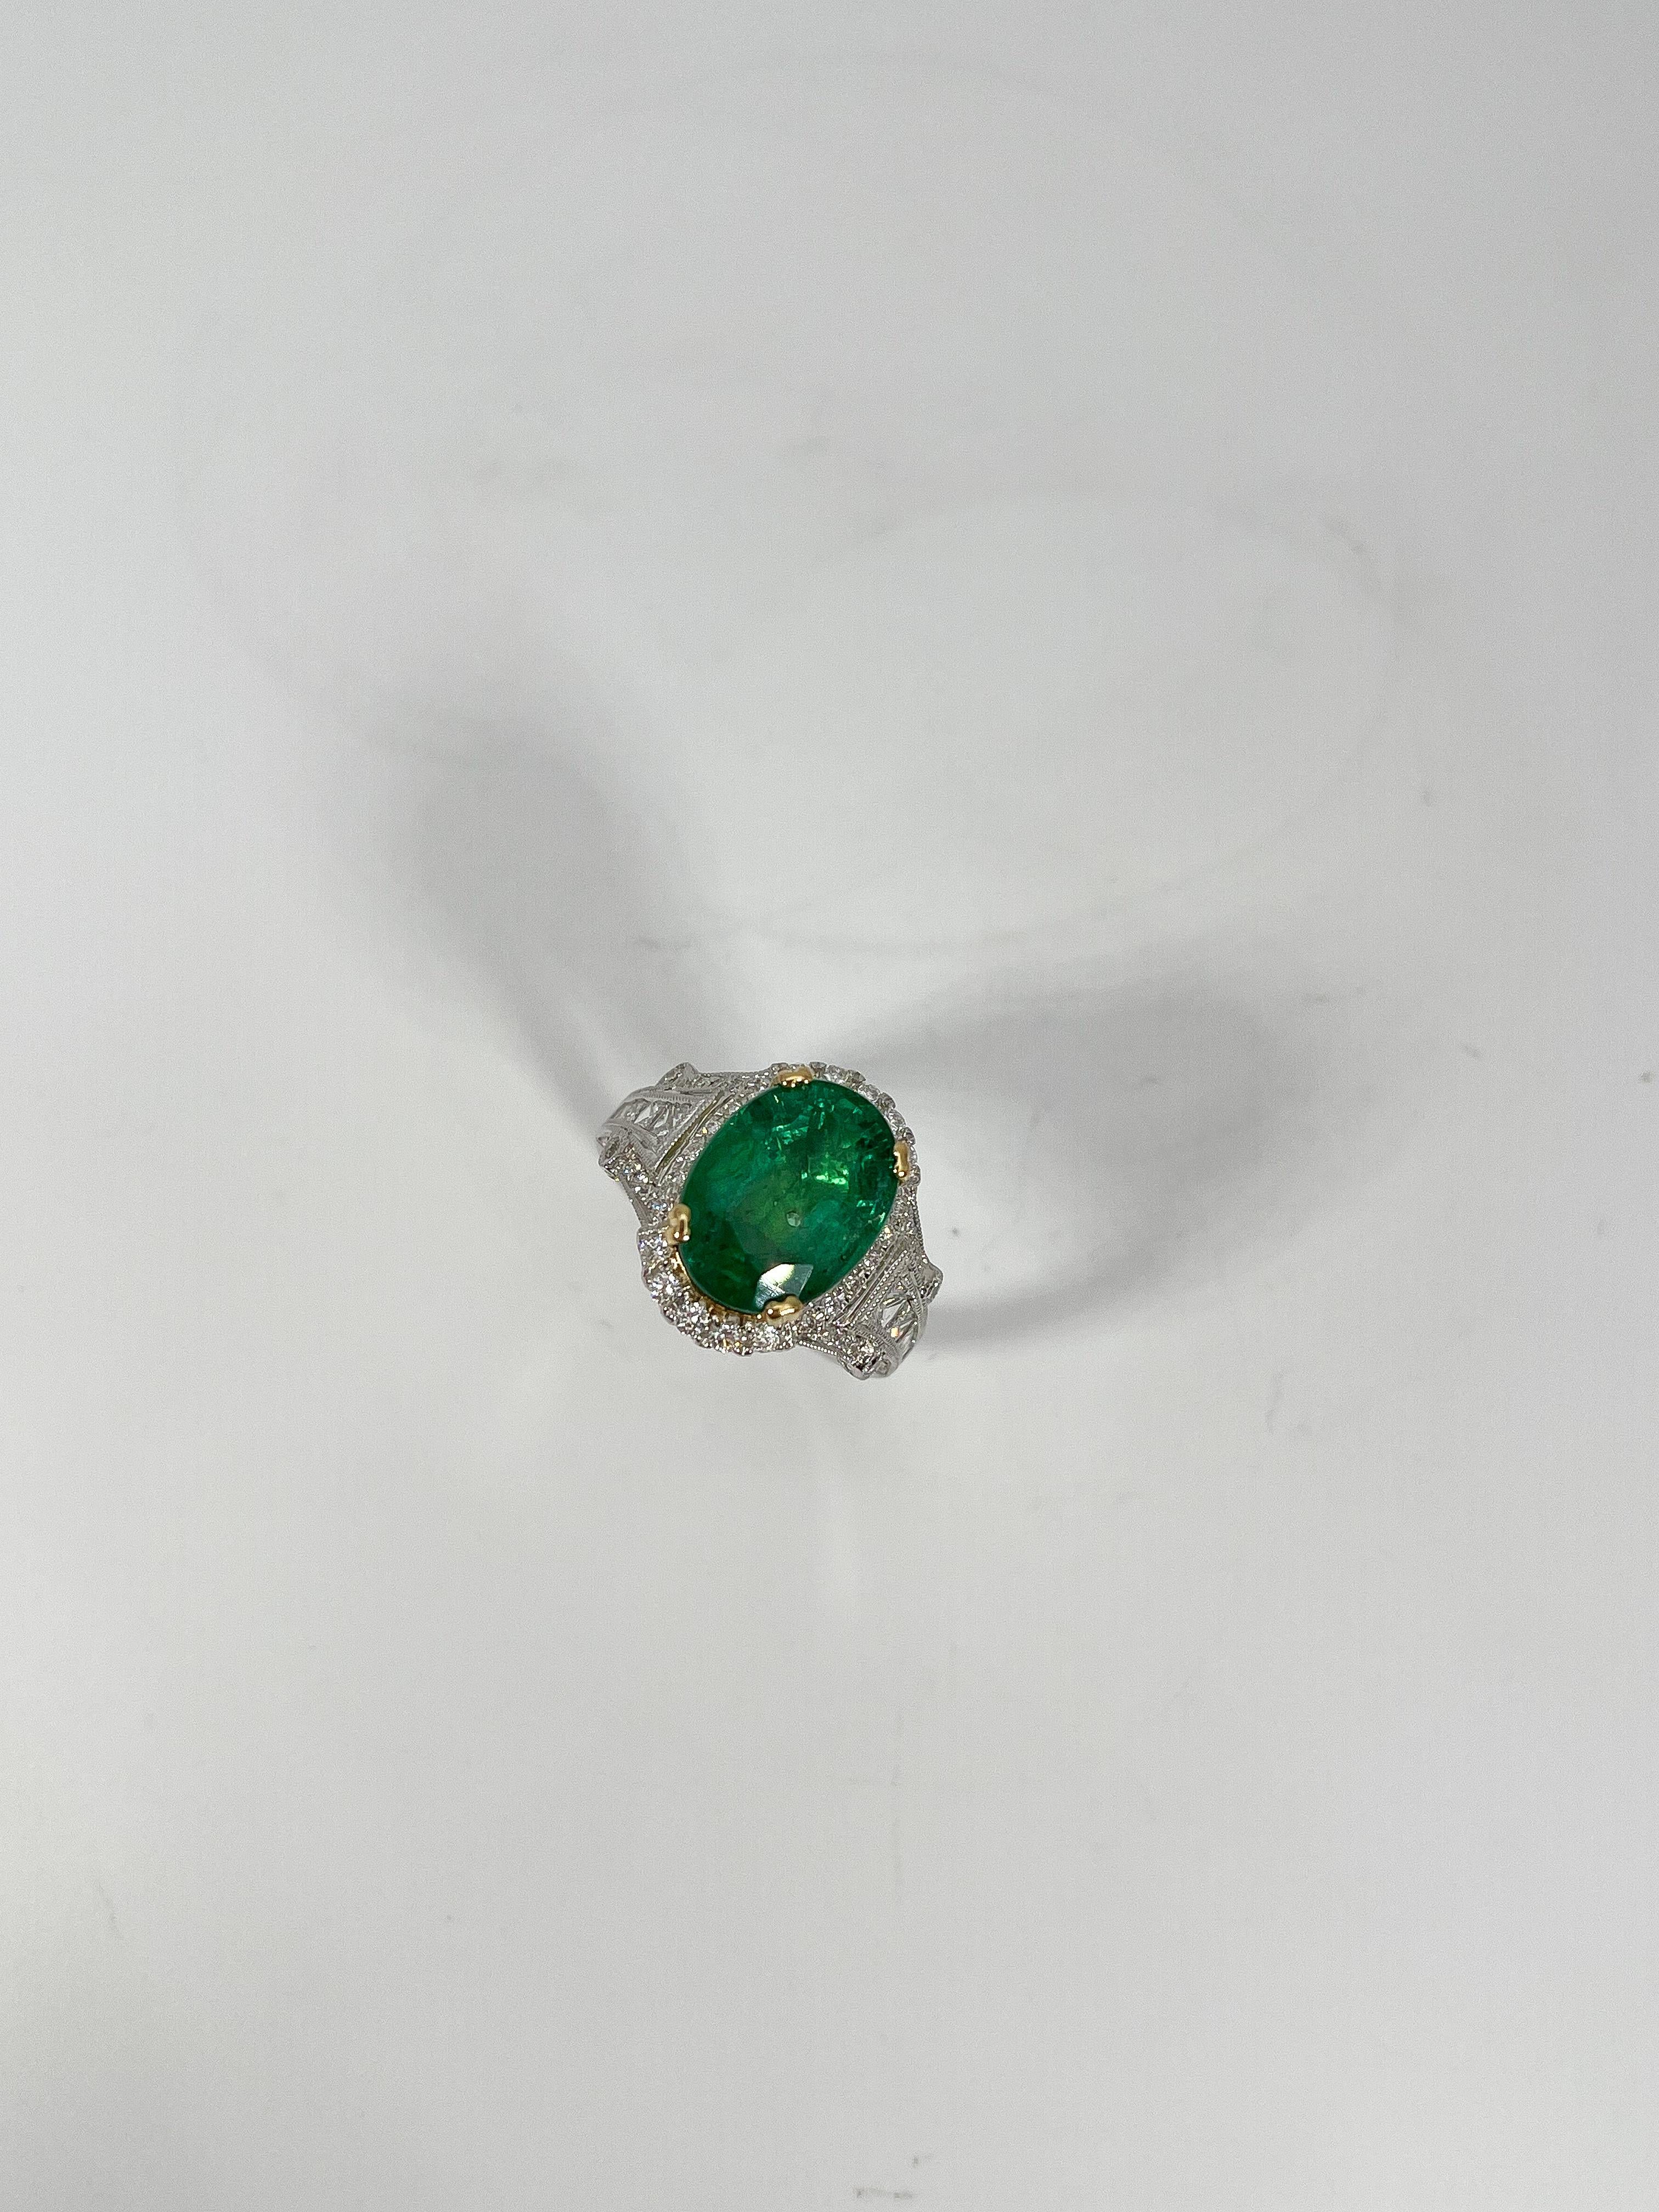 Ladies designer size 6 1/4 18k white and yellow gold ring by EFFY featuring an oval cut emerald accented with multi-shaped cut diamonds. The ring is hallmarked 18k 750 EFFY. Total item weight is 8.4 grams. Comes with AJI certification.
Emerald